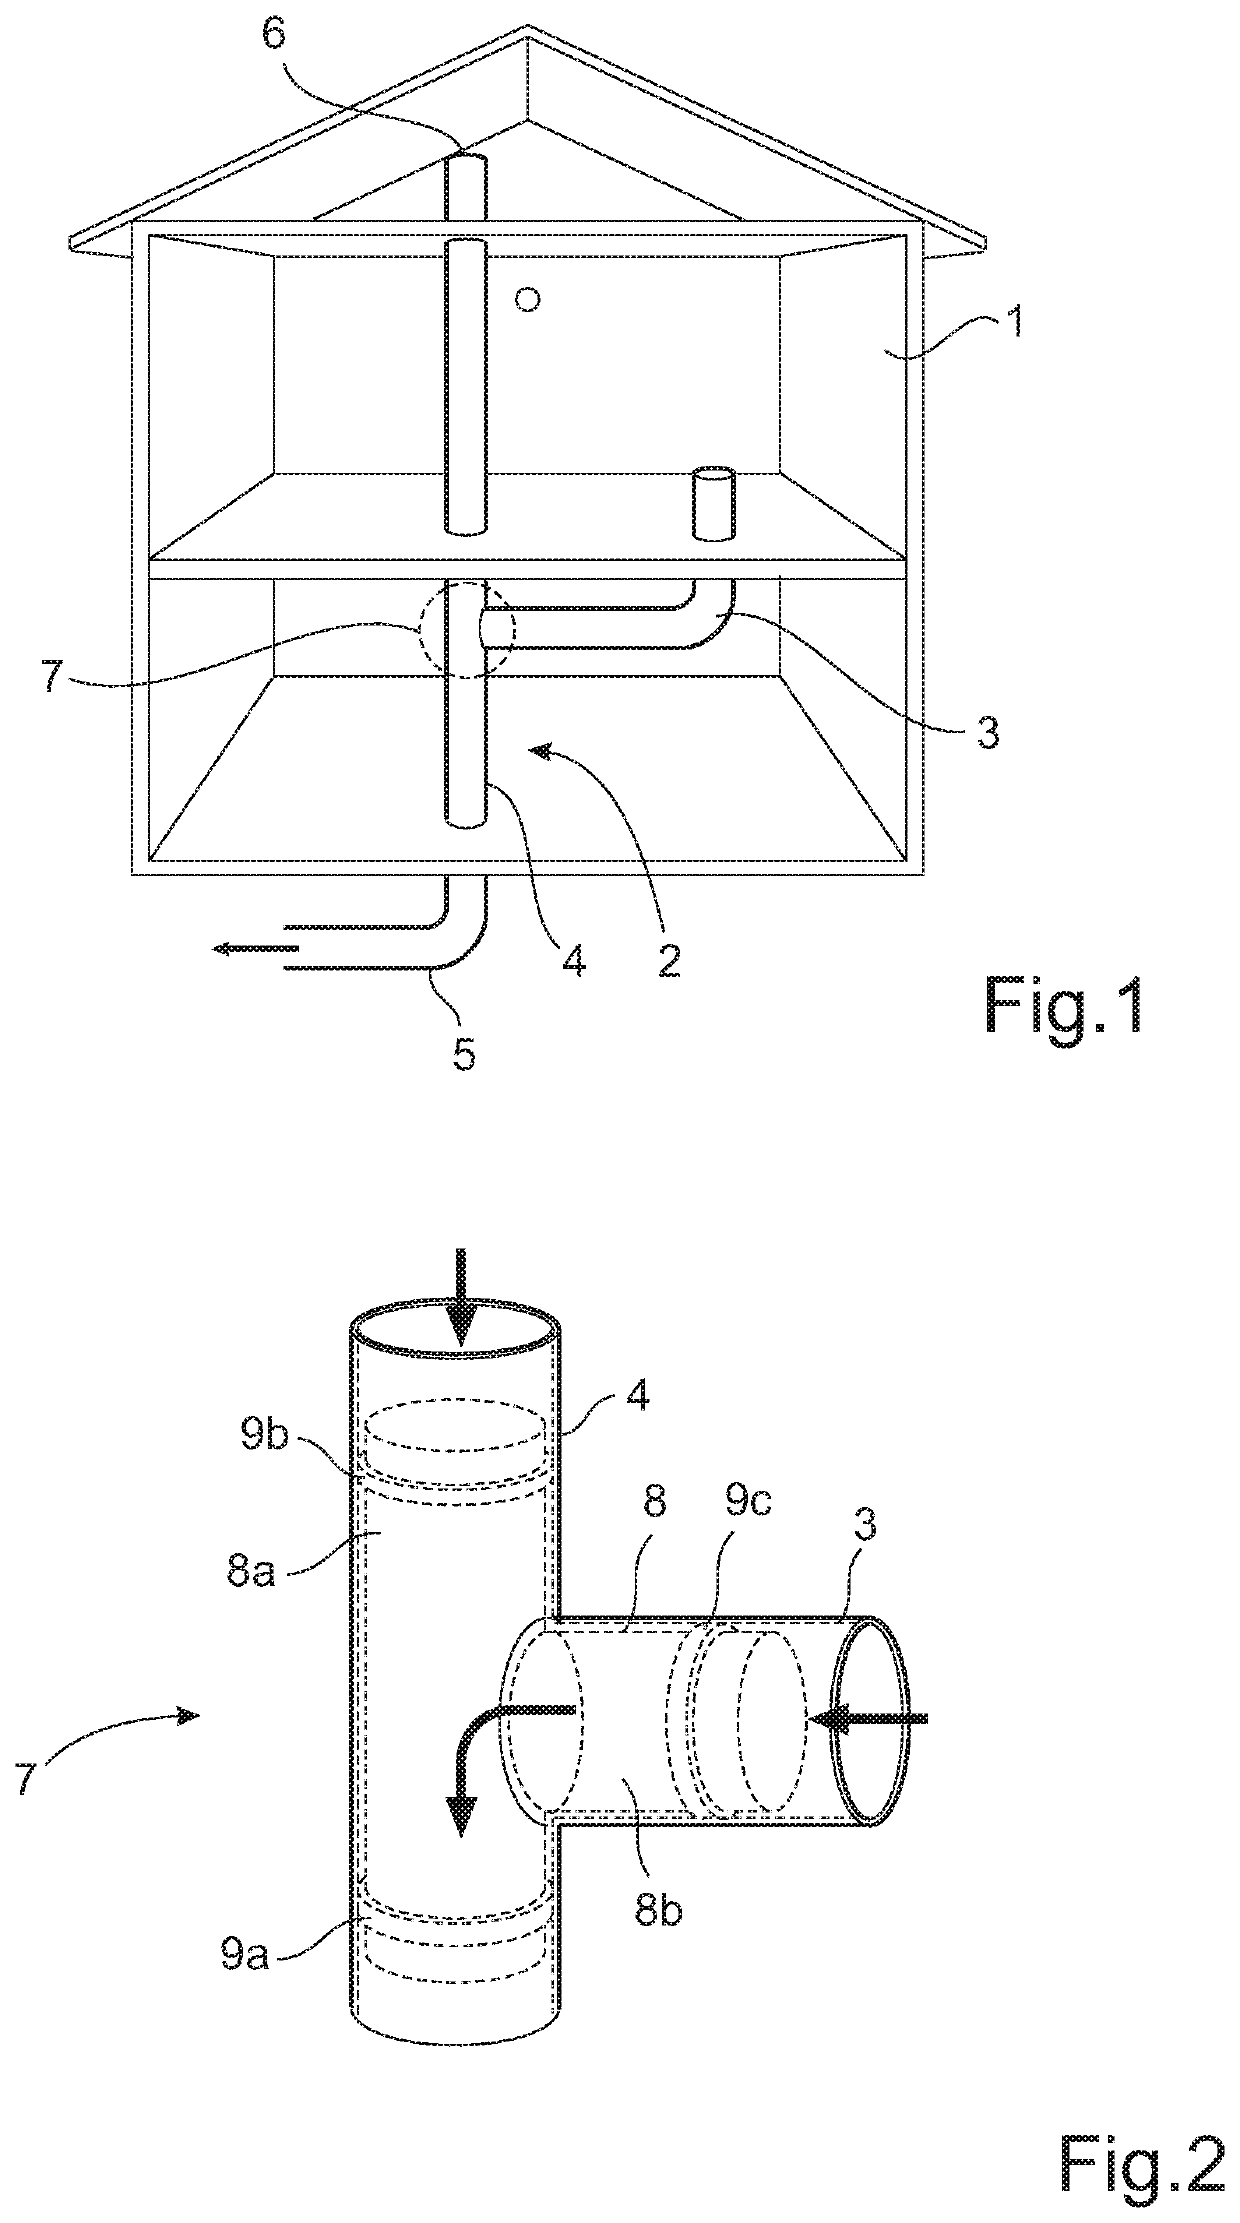 A liner arrangement for installing in a pipe structure, and a method for relining a pipe structure